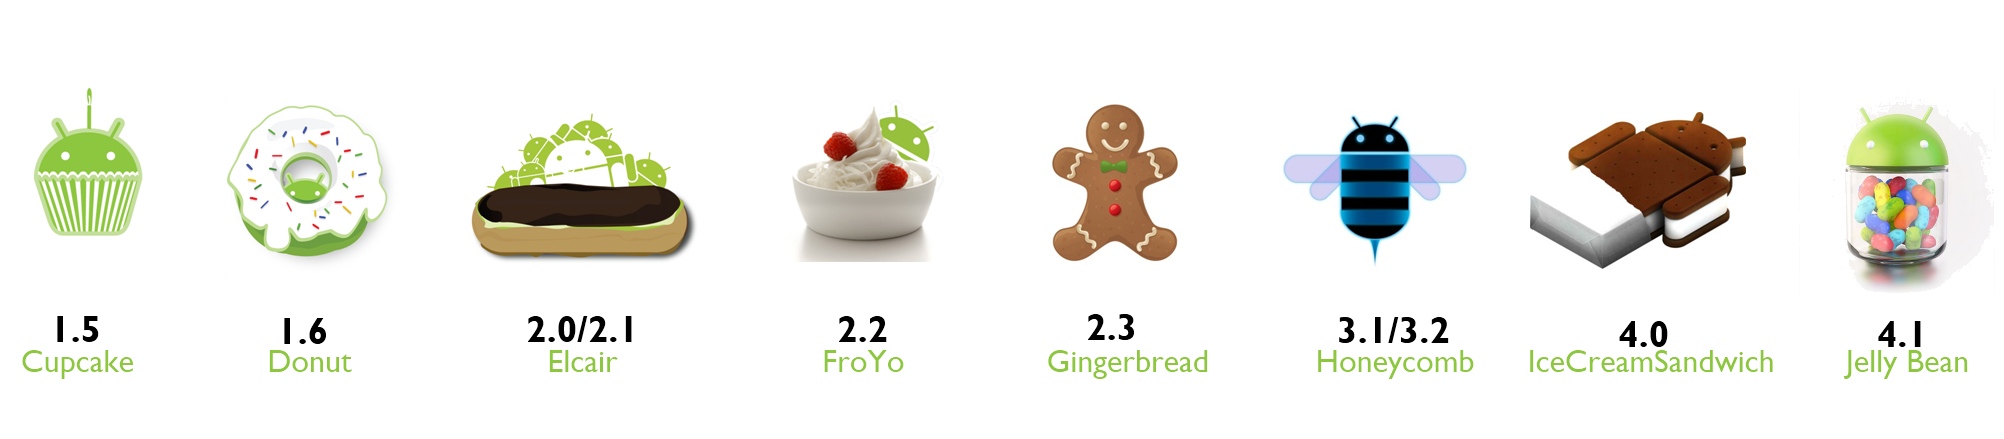 Android ICS Only on 10% of Devices with Gingerbread Still on Top!